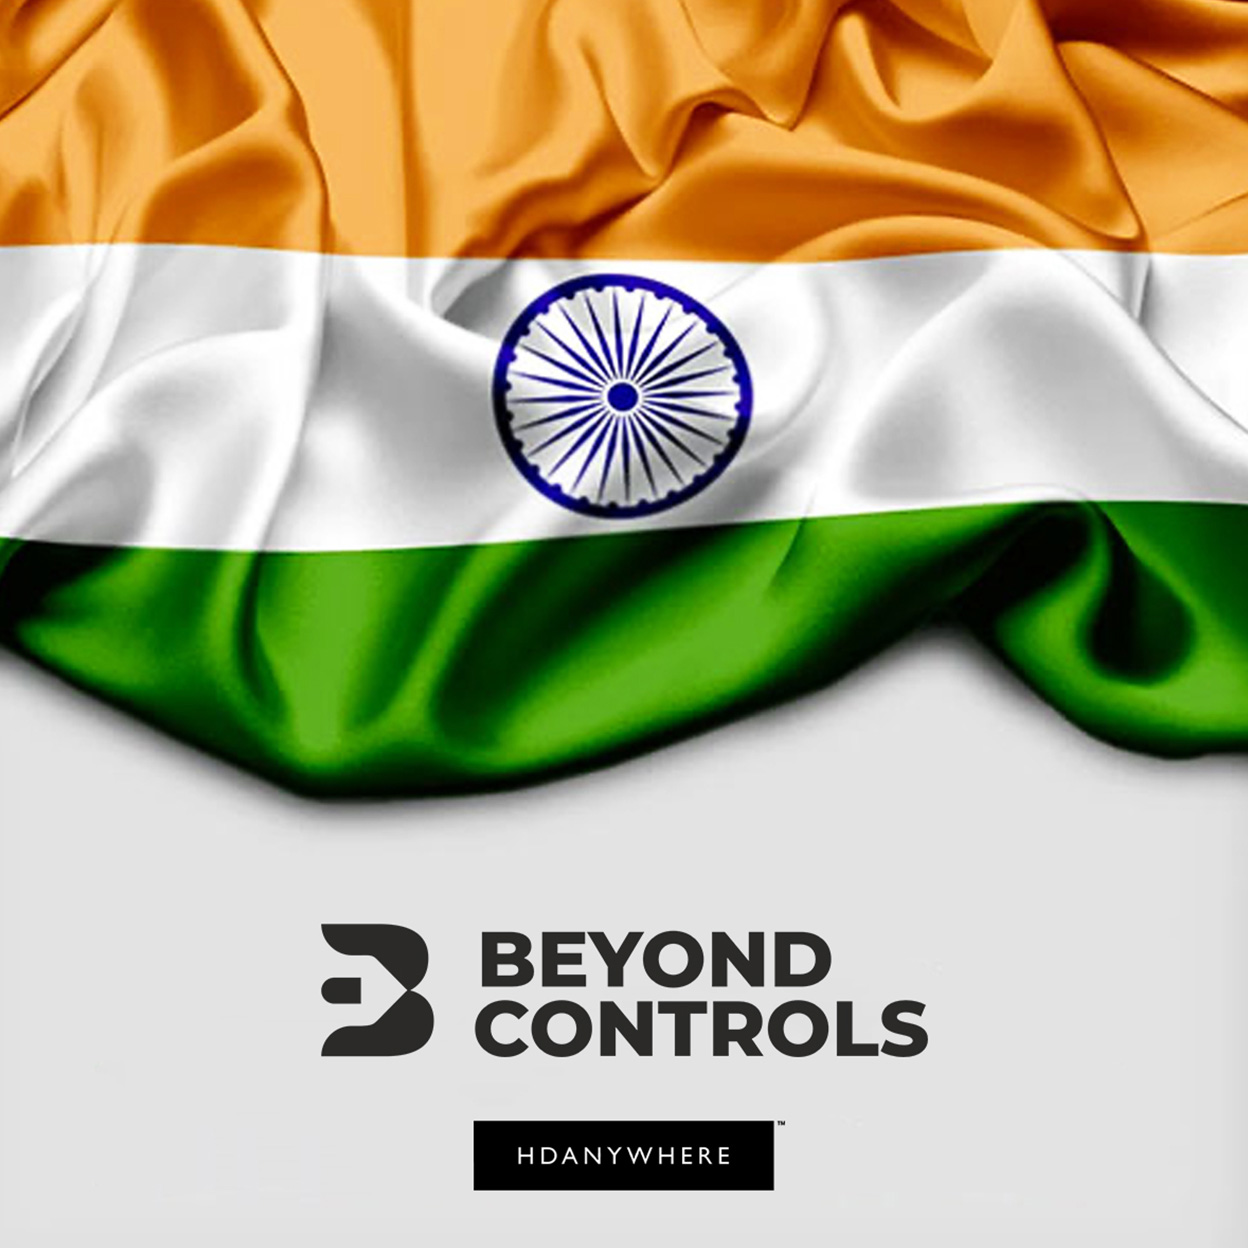 HDANYWHERE partners with 
Beyond Controls in India.